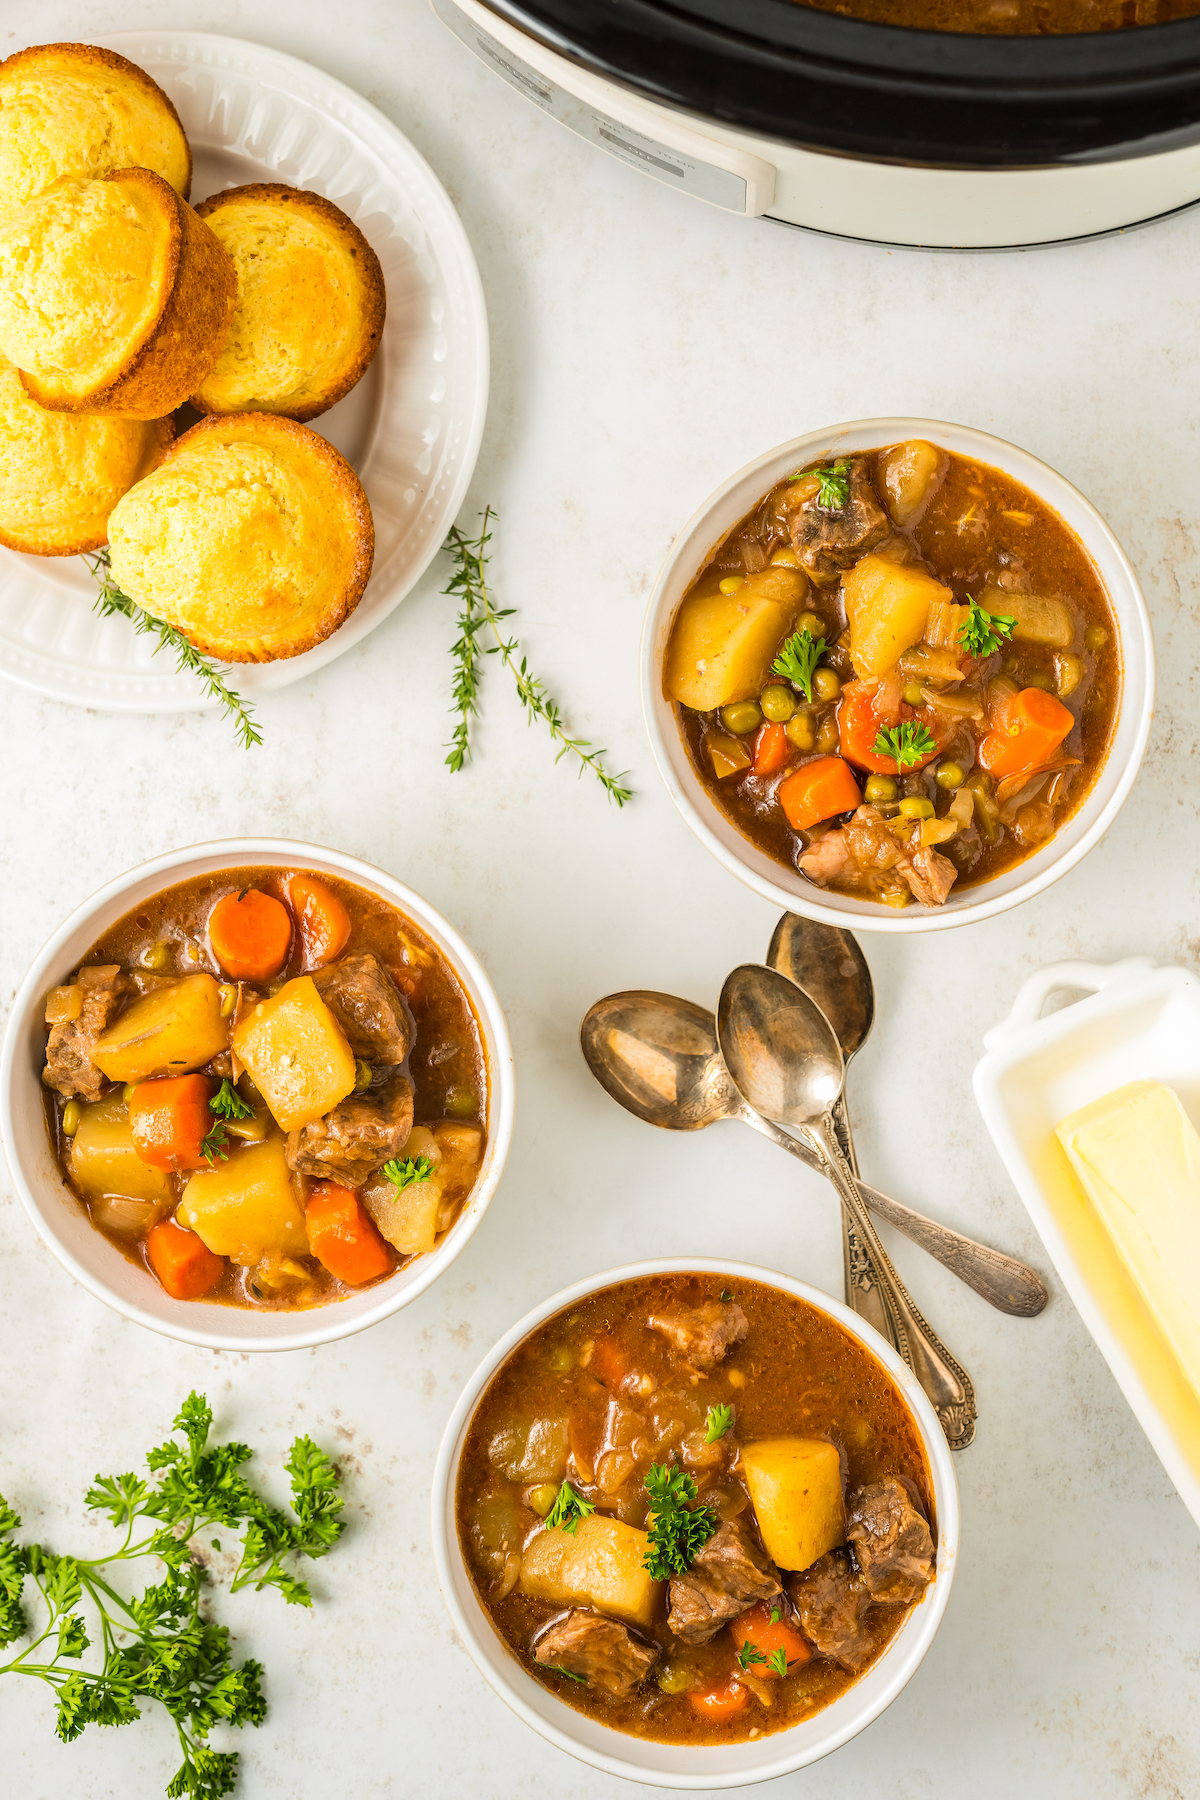 Overhead shot of corn muffins, beef stew, and spoons on a table with fresh herbs.